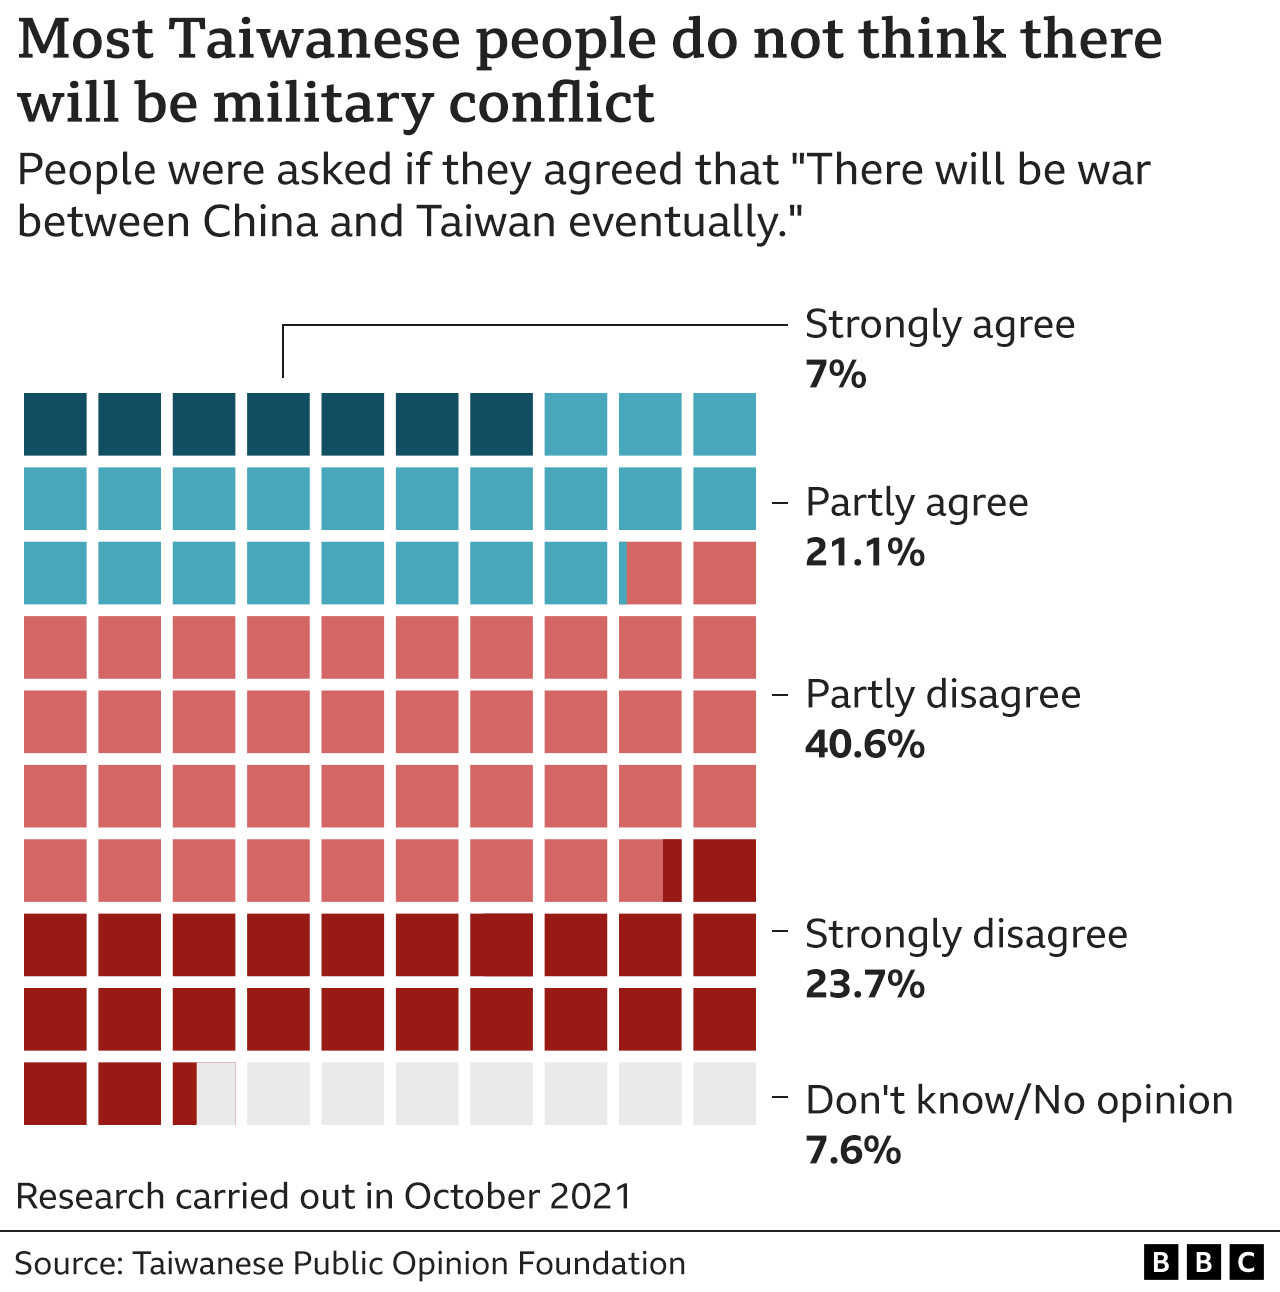 Graphic showing that most Taiwanese people don't think there will be military conflict